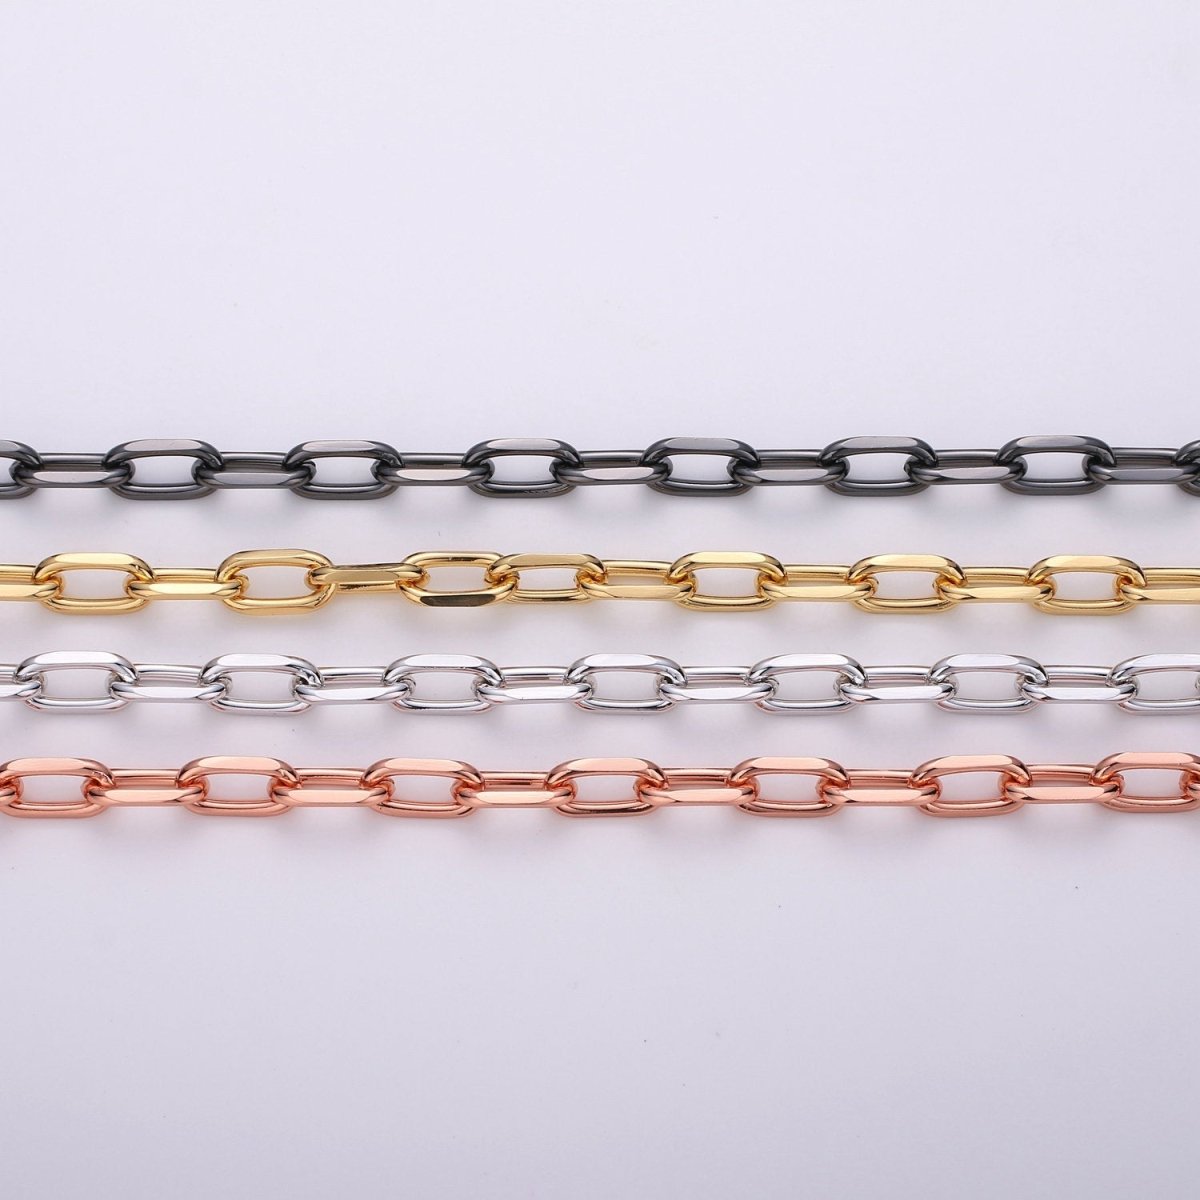 24K Gold Filled Chain Fashion CABLE Chain - Silver, Rose Gold, Black Chunky Chain, 12X7mm 2mm Thick Chain | ROLL-143, ROLL-144, ROLL-145, ROLL-146 Clearance Pricing - DLUXCA